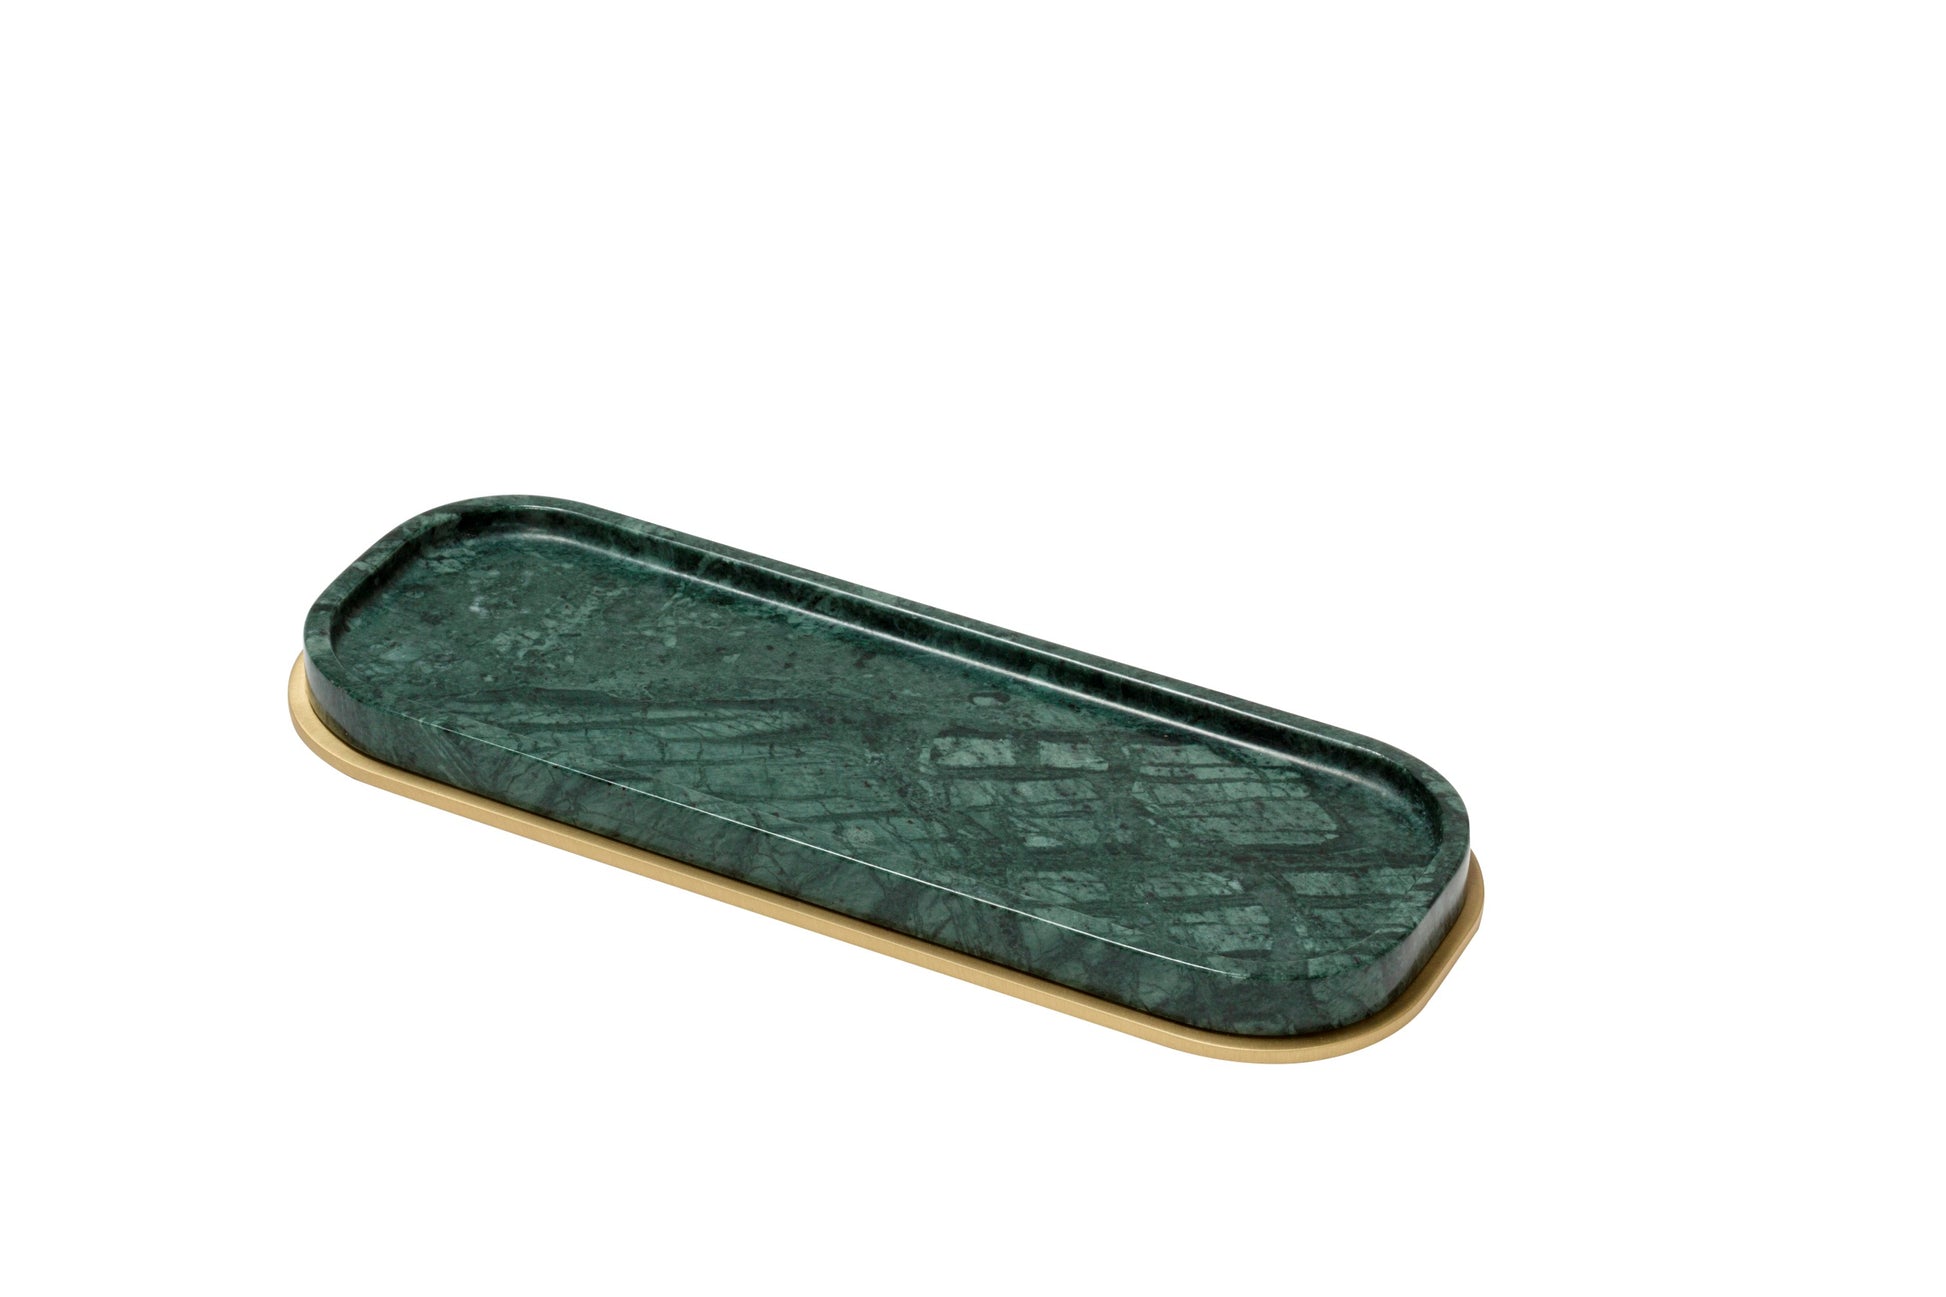 Giobagnara Positano Marble Valet Tray Long Rectangular | Marble Structure with Brass Base Frame | Non-Slip Waterproof Rubber Base | Stylish and Functional Home Organization | Explore a Range of Luxury Home Decor at 2Jour Concierge, #1 luxury high-end gift & lifestyle shop